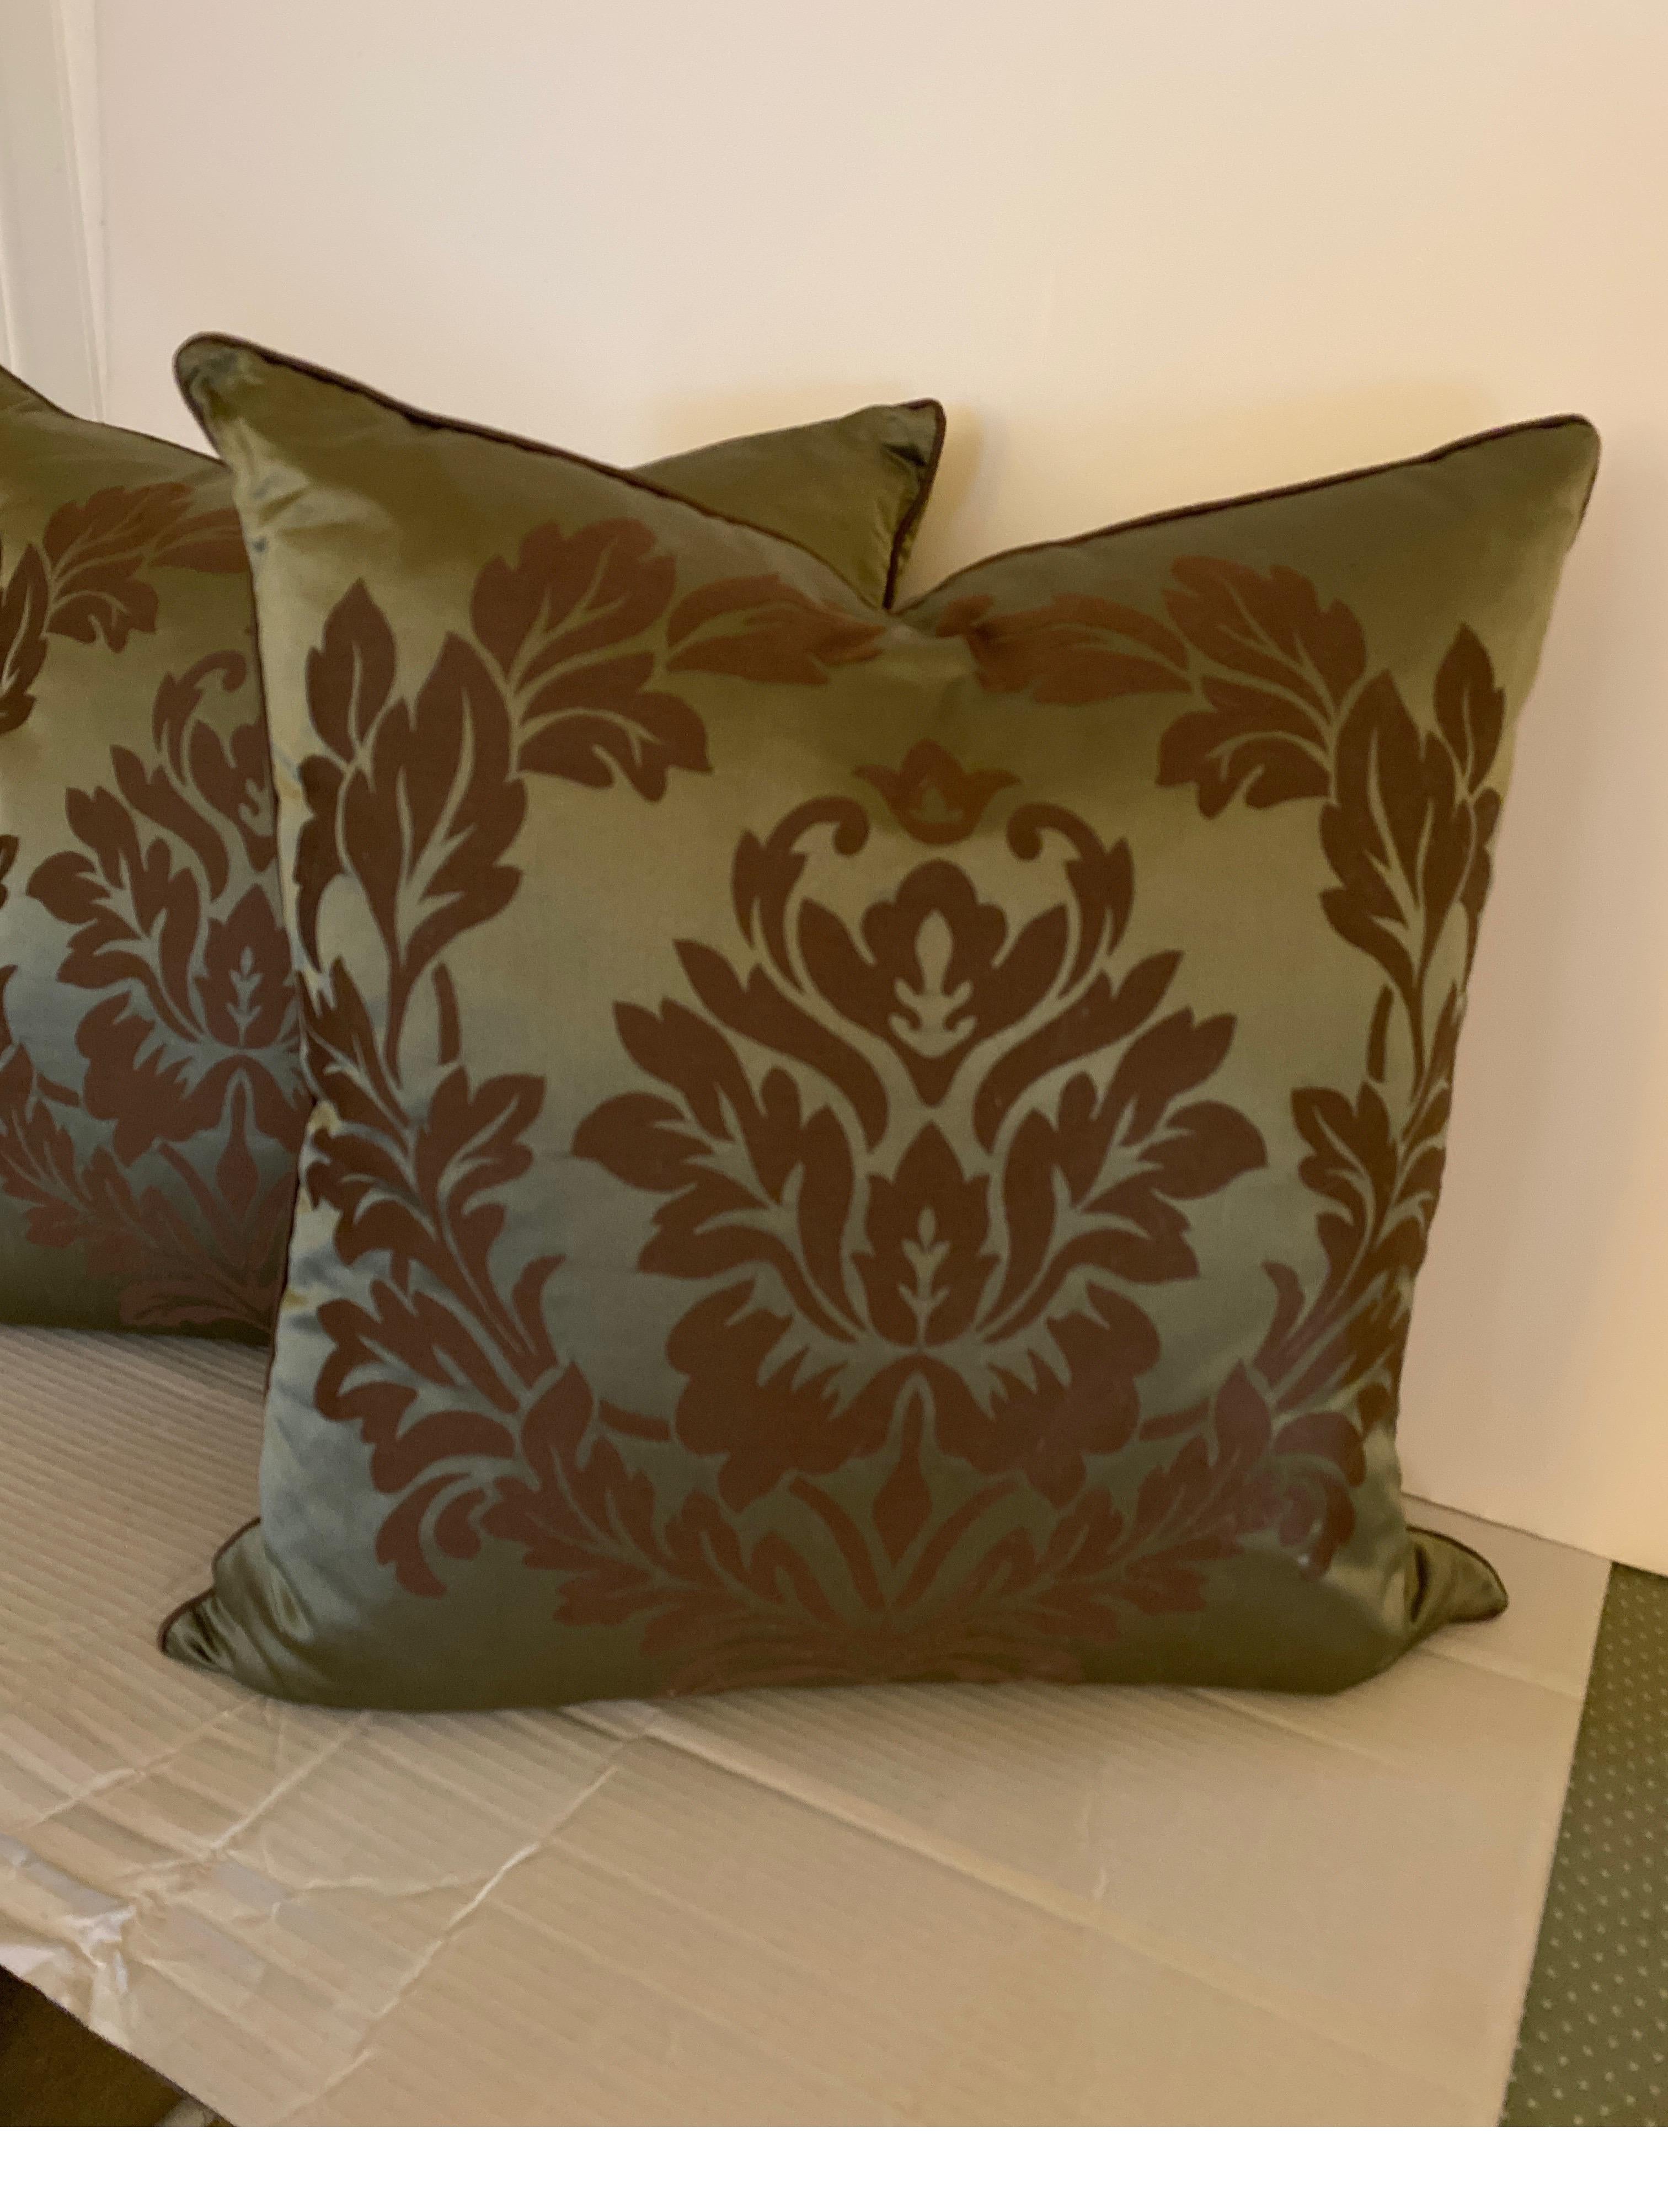 A Pair of pure silk damask pillows with down and feather inserts. The best quality upholstery weight silk fabric with a steel Aqua background with an umber-plum damask pattern. These are patterned on both sides, 18 inches square.